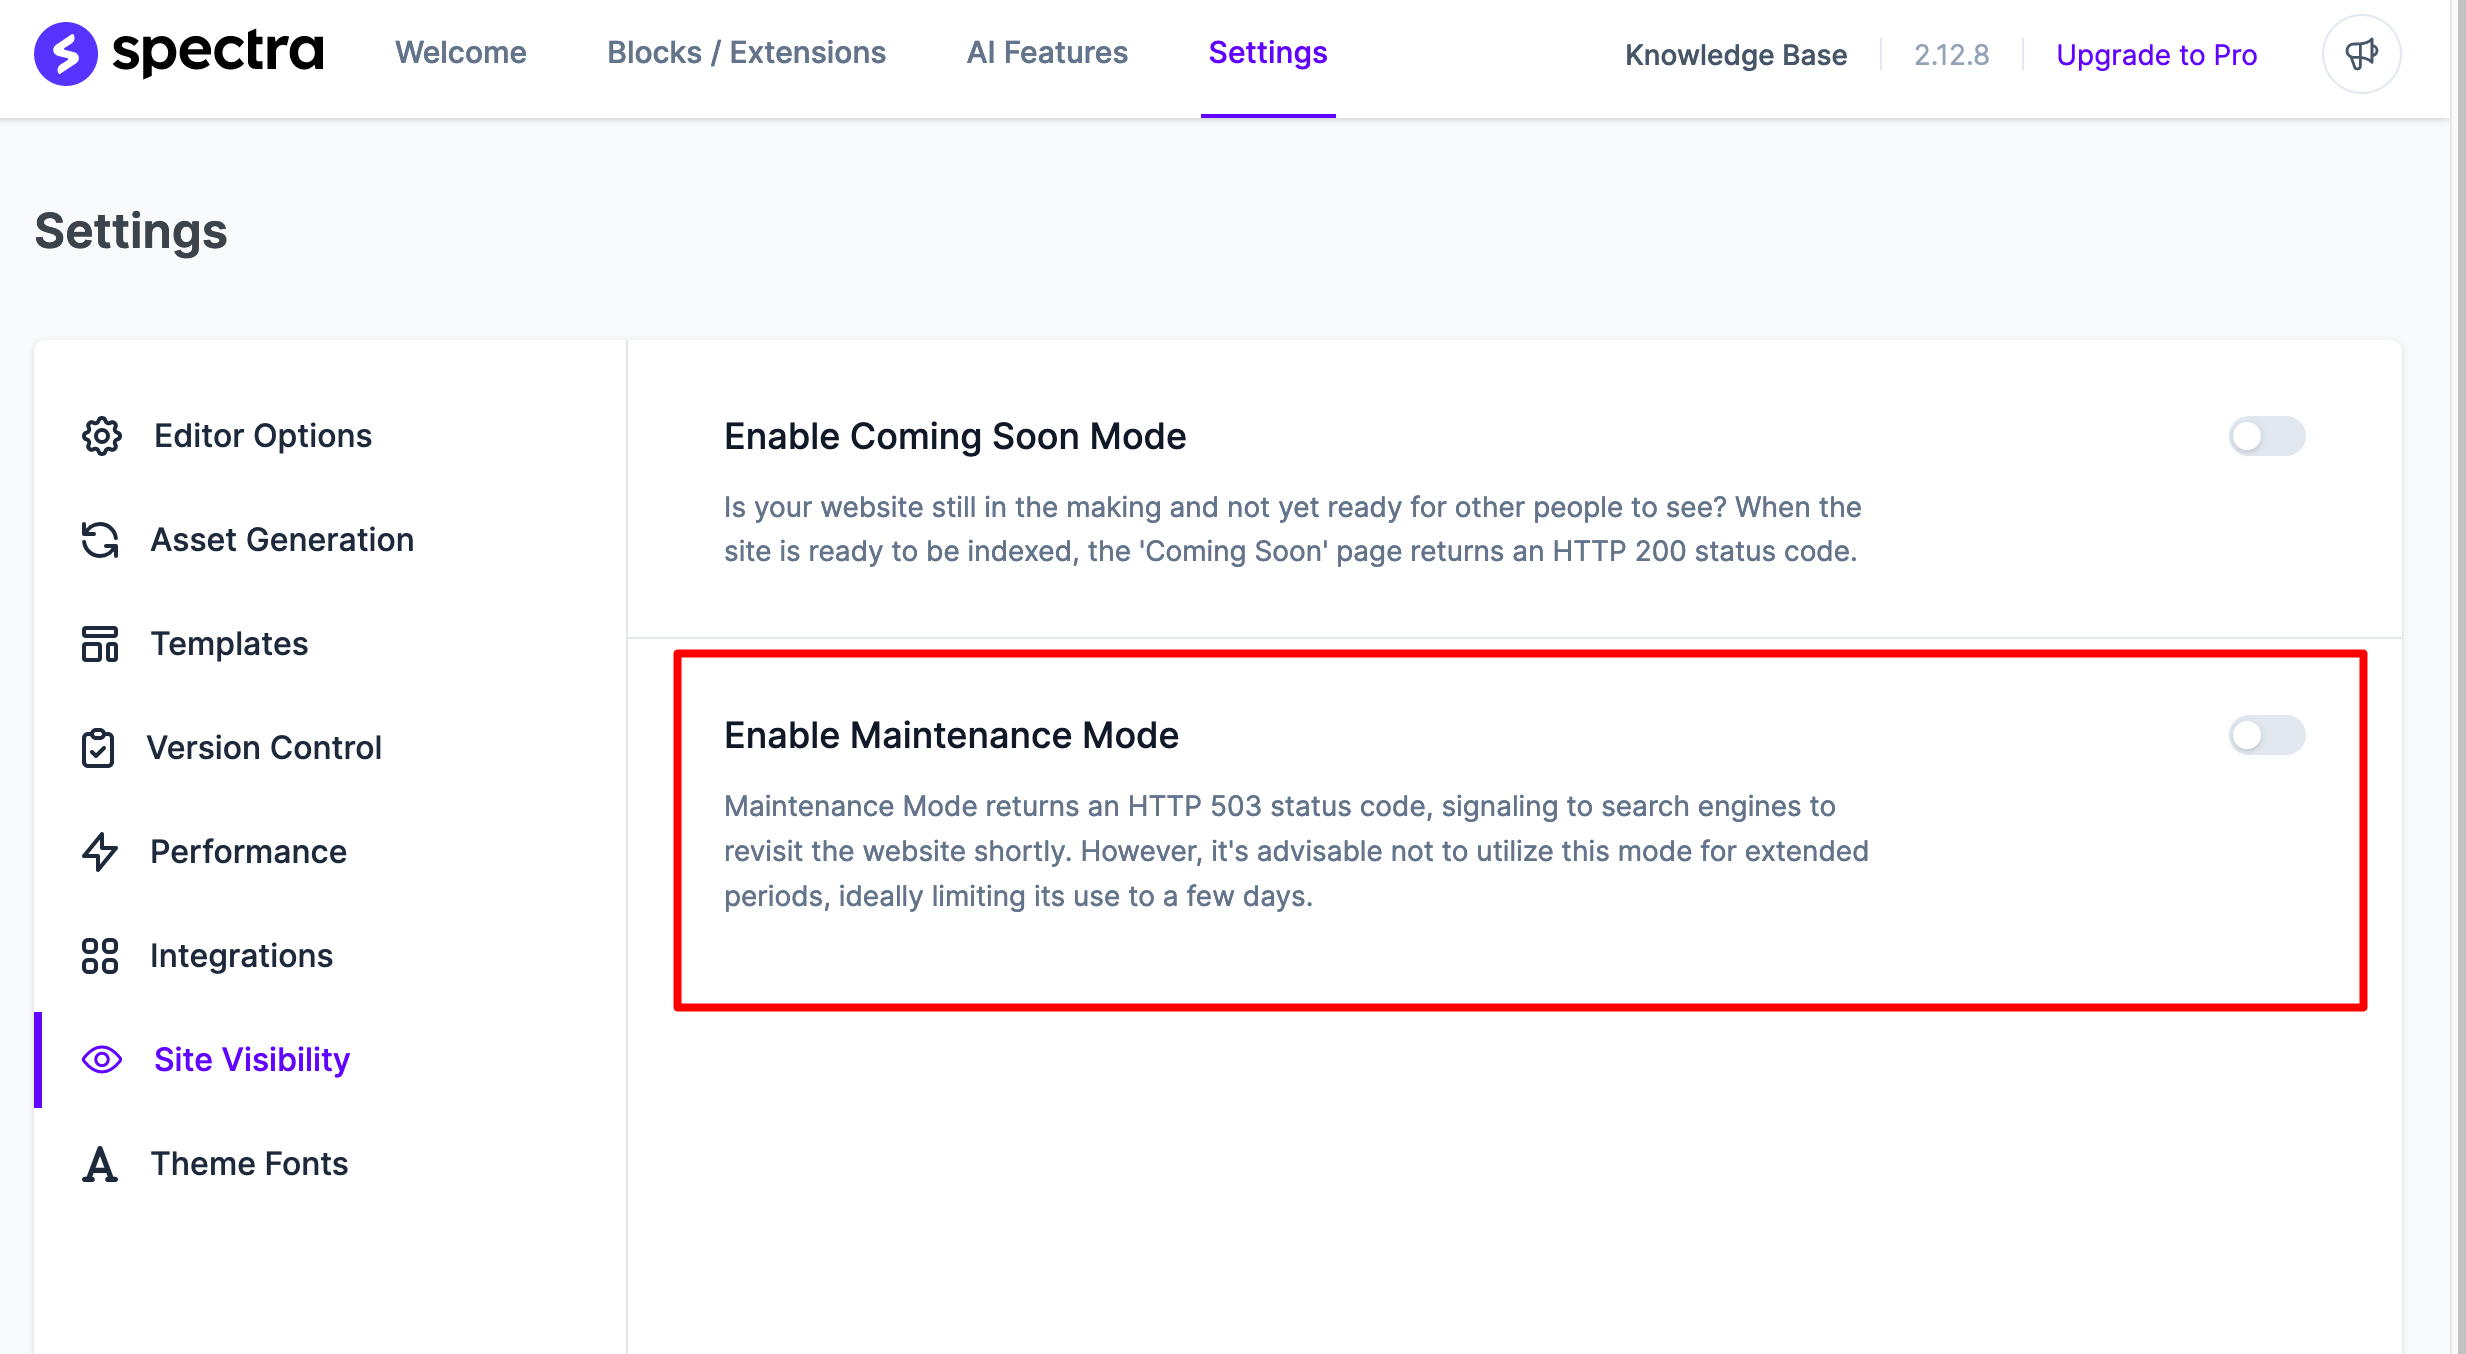 Spectra offers a "maintenance mode" in its settings.